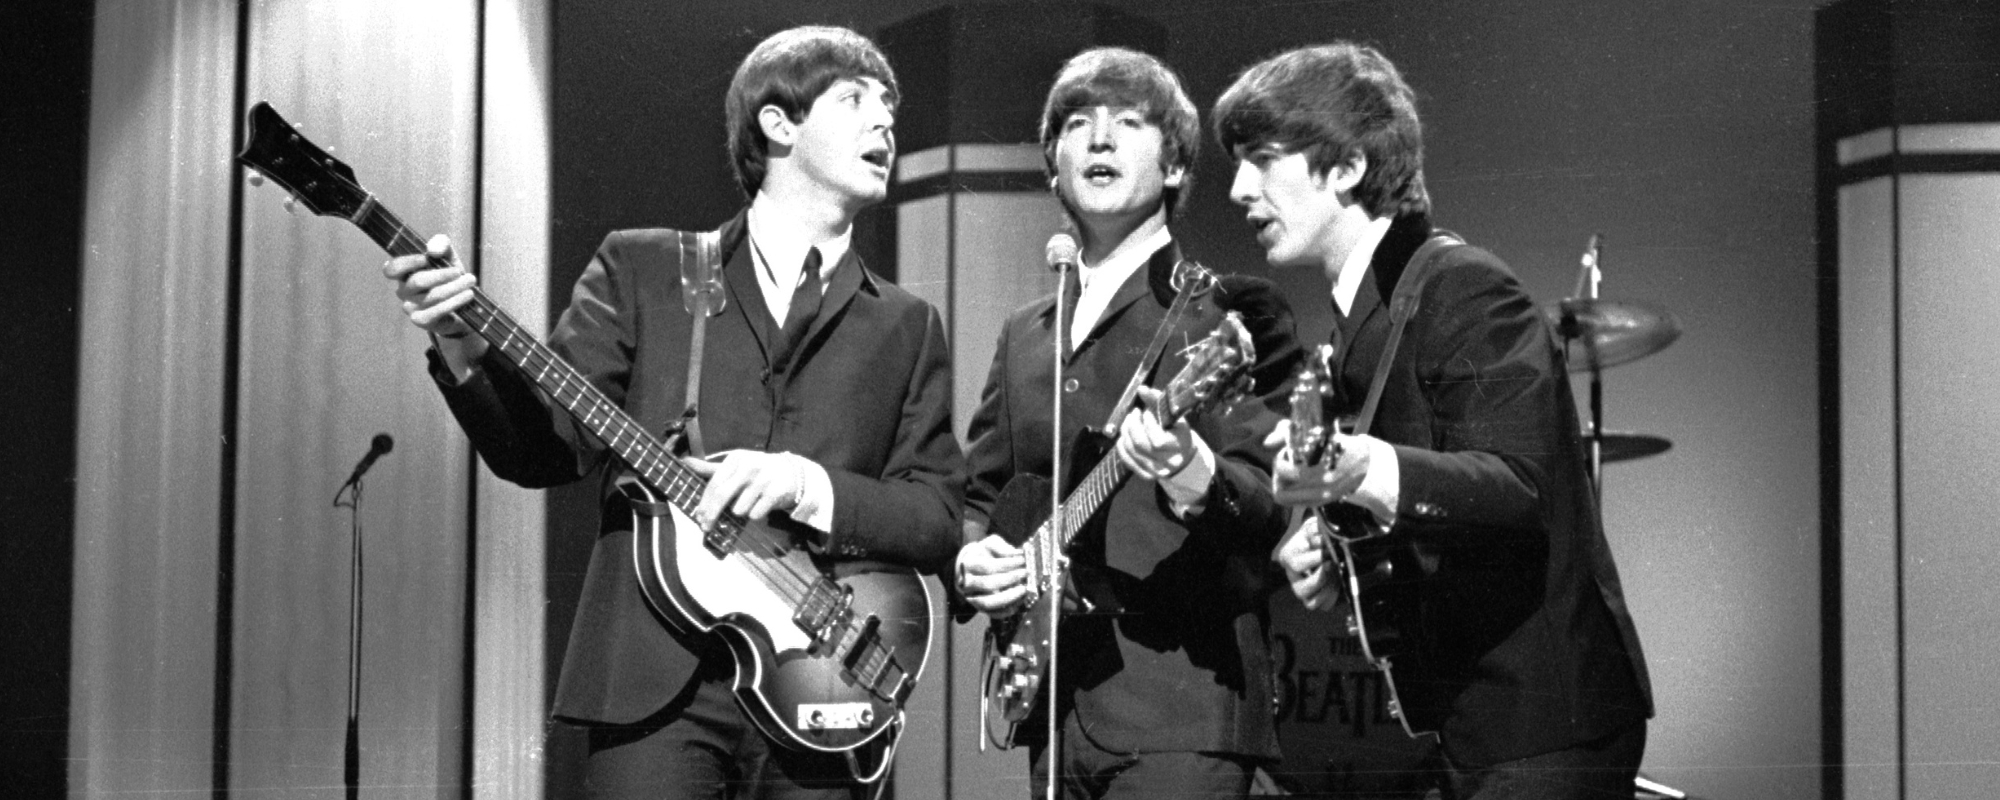 The Story Behind the Beatles Cover That Secretly Helped Launch Their Career